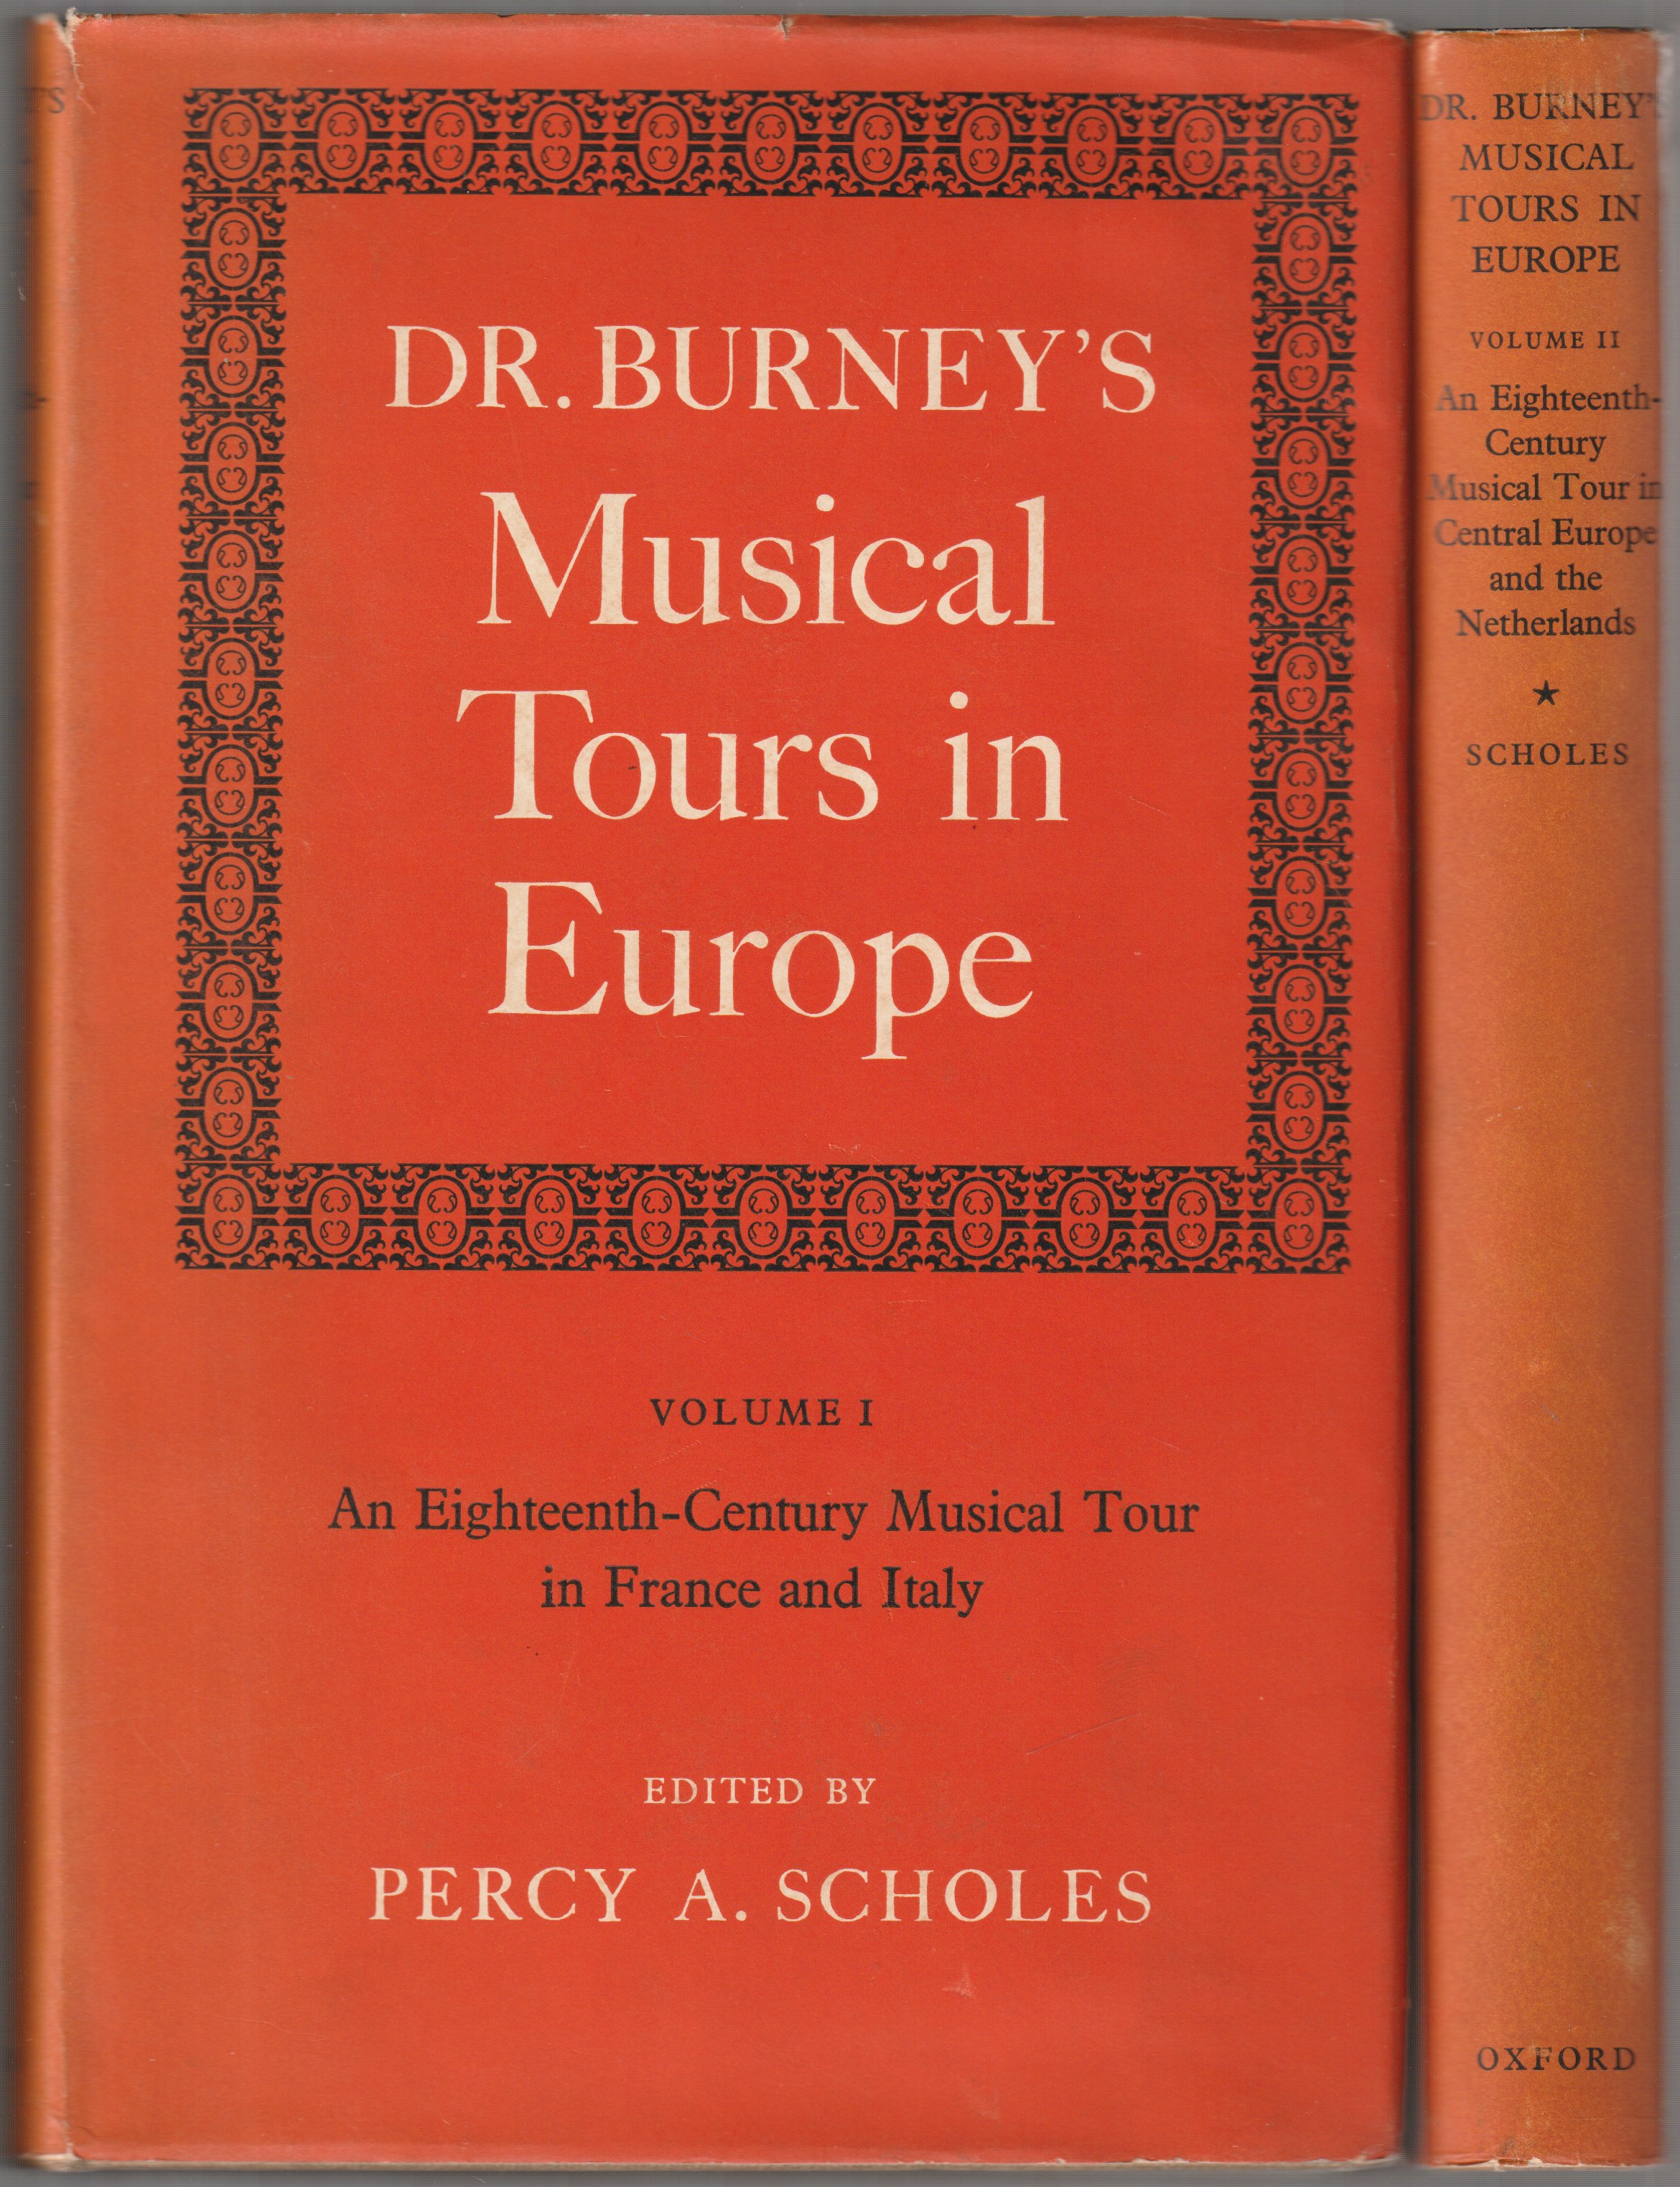 Dr. Burney's Musical tours in Europe, 1-2